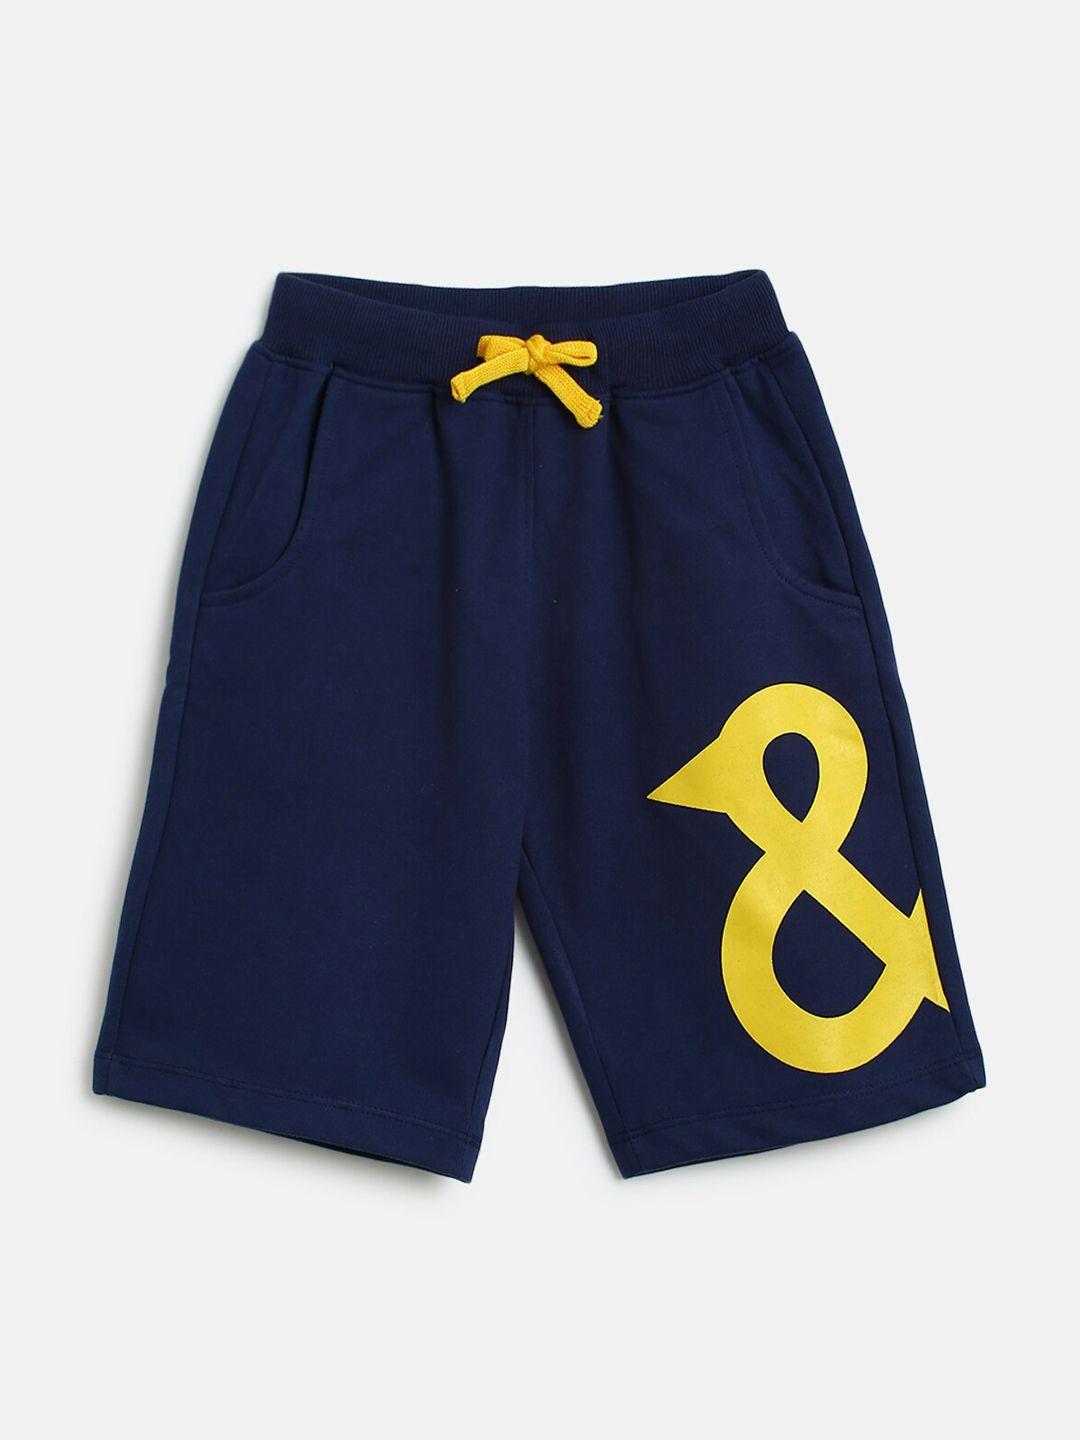 tales & stories boys navy blue cotton printed shorts